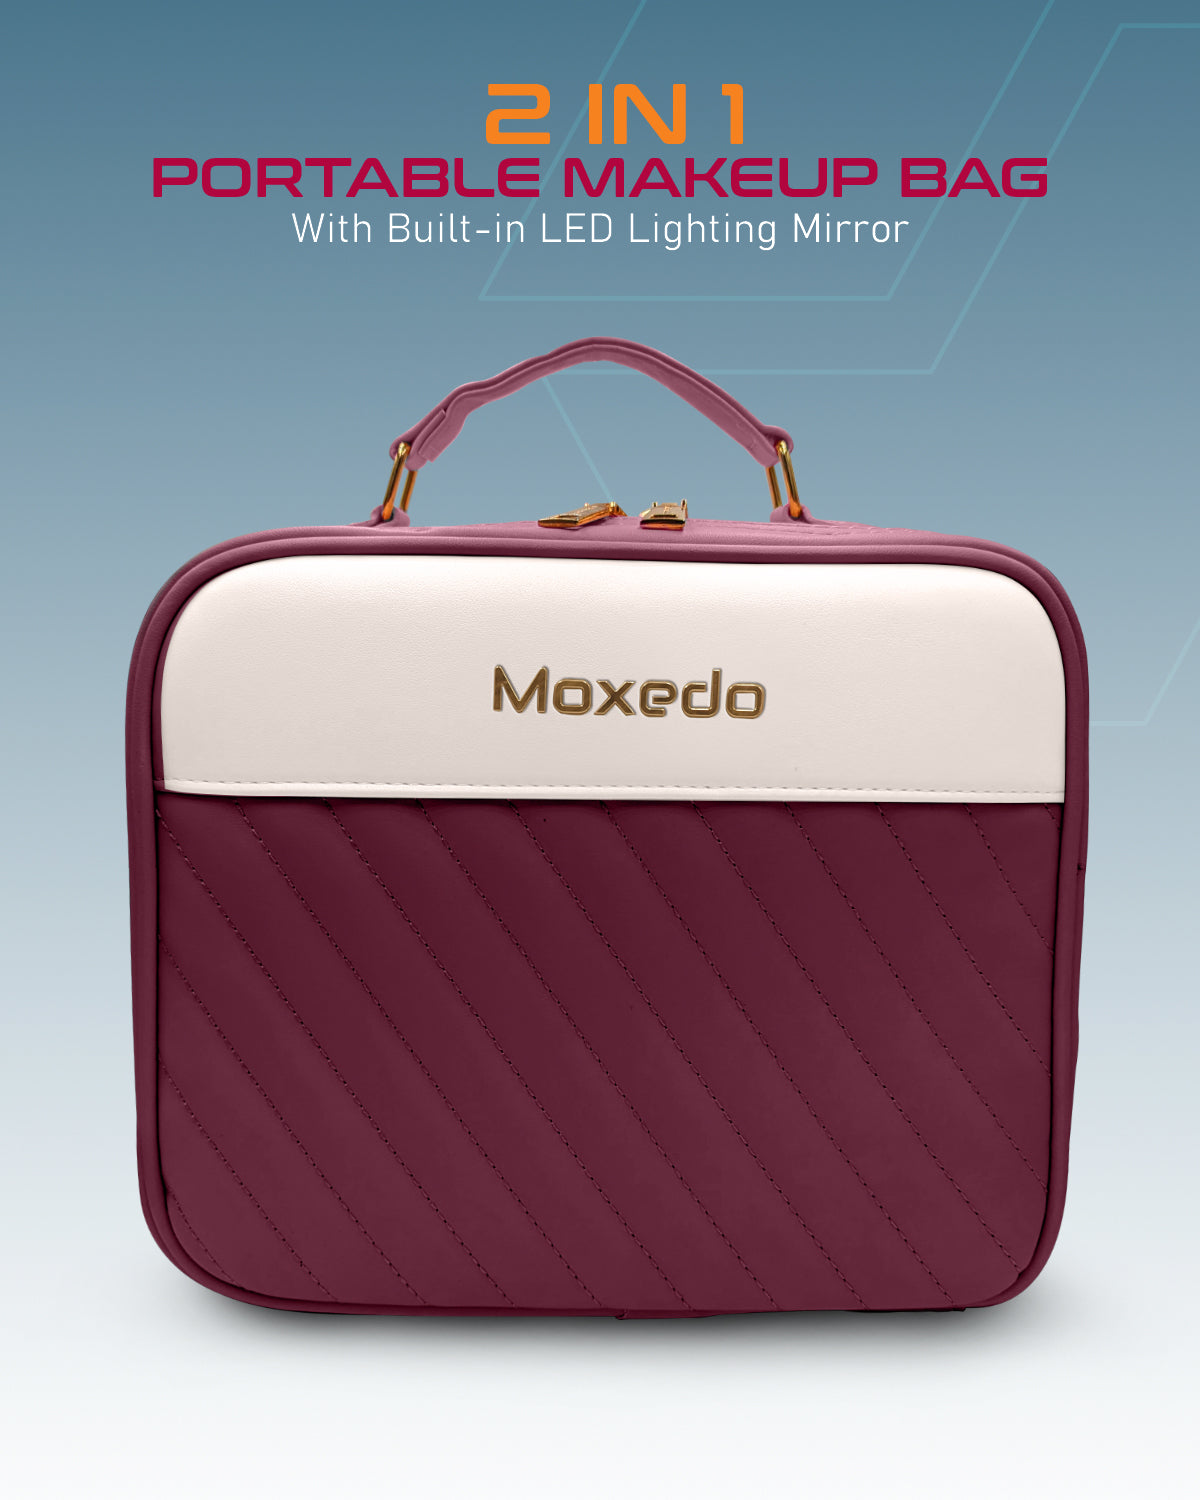 Moxedo 2 in 1 Portable Make-up Bag with Built-in LED Lighting Mirror (Maroon)